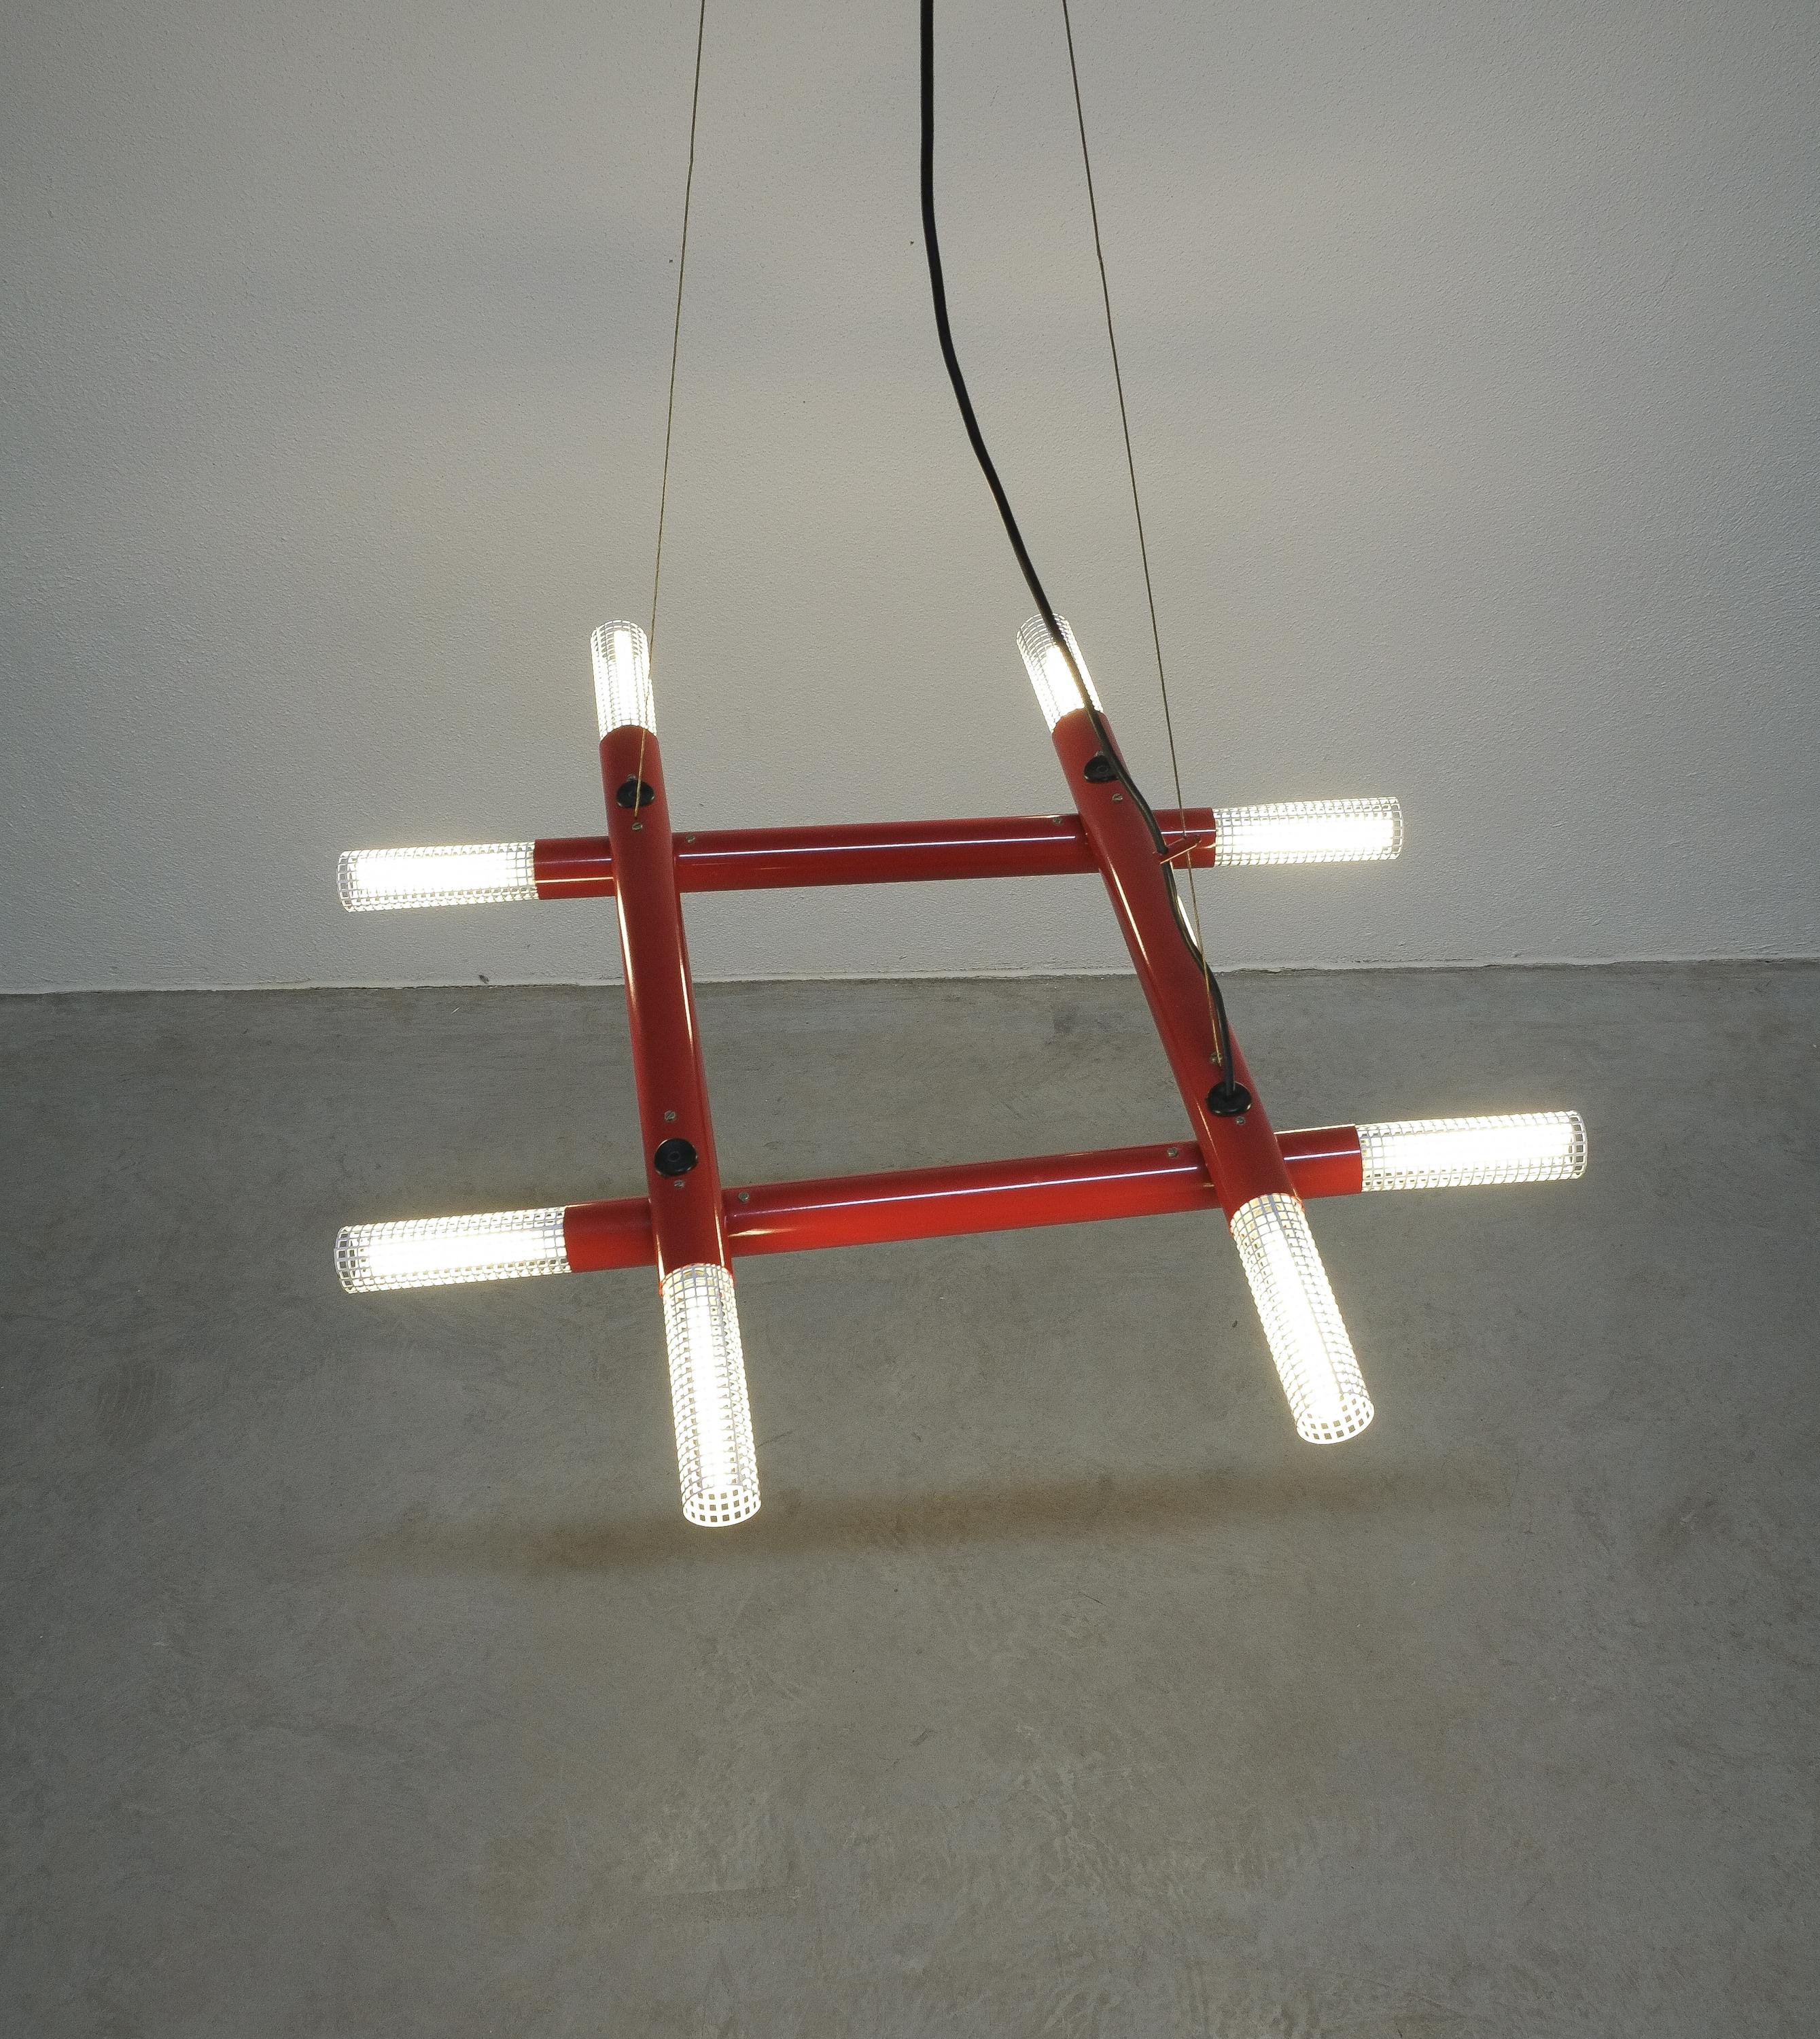 Postmodern red metal atomic chandelier, circa 1980

Cool architectural contemporary chandelier from the 1980s, Italy. It illuminates with 8 bulbs hidden behind white perforated metal diffusers. It can be adjusted pivoting the red tubes. The